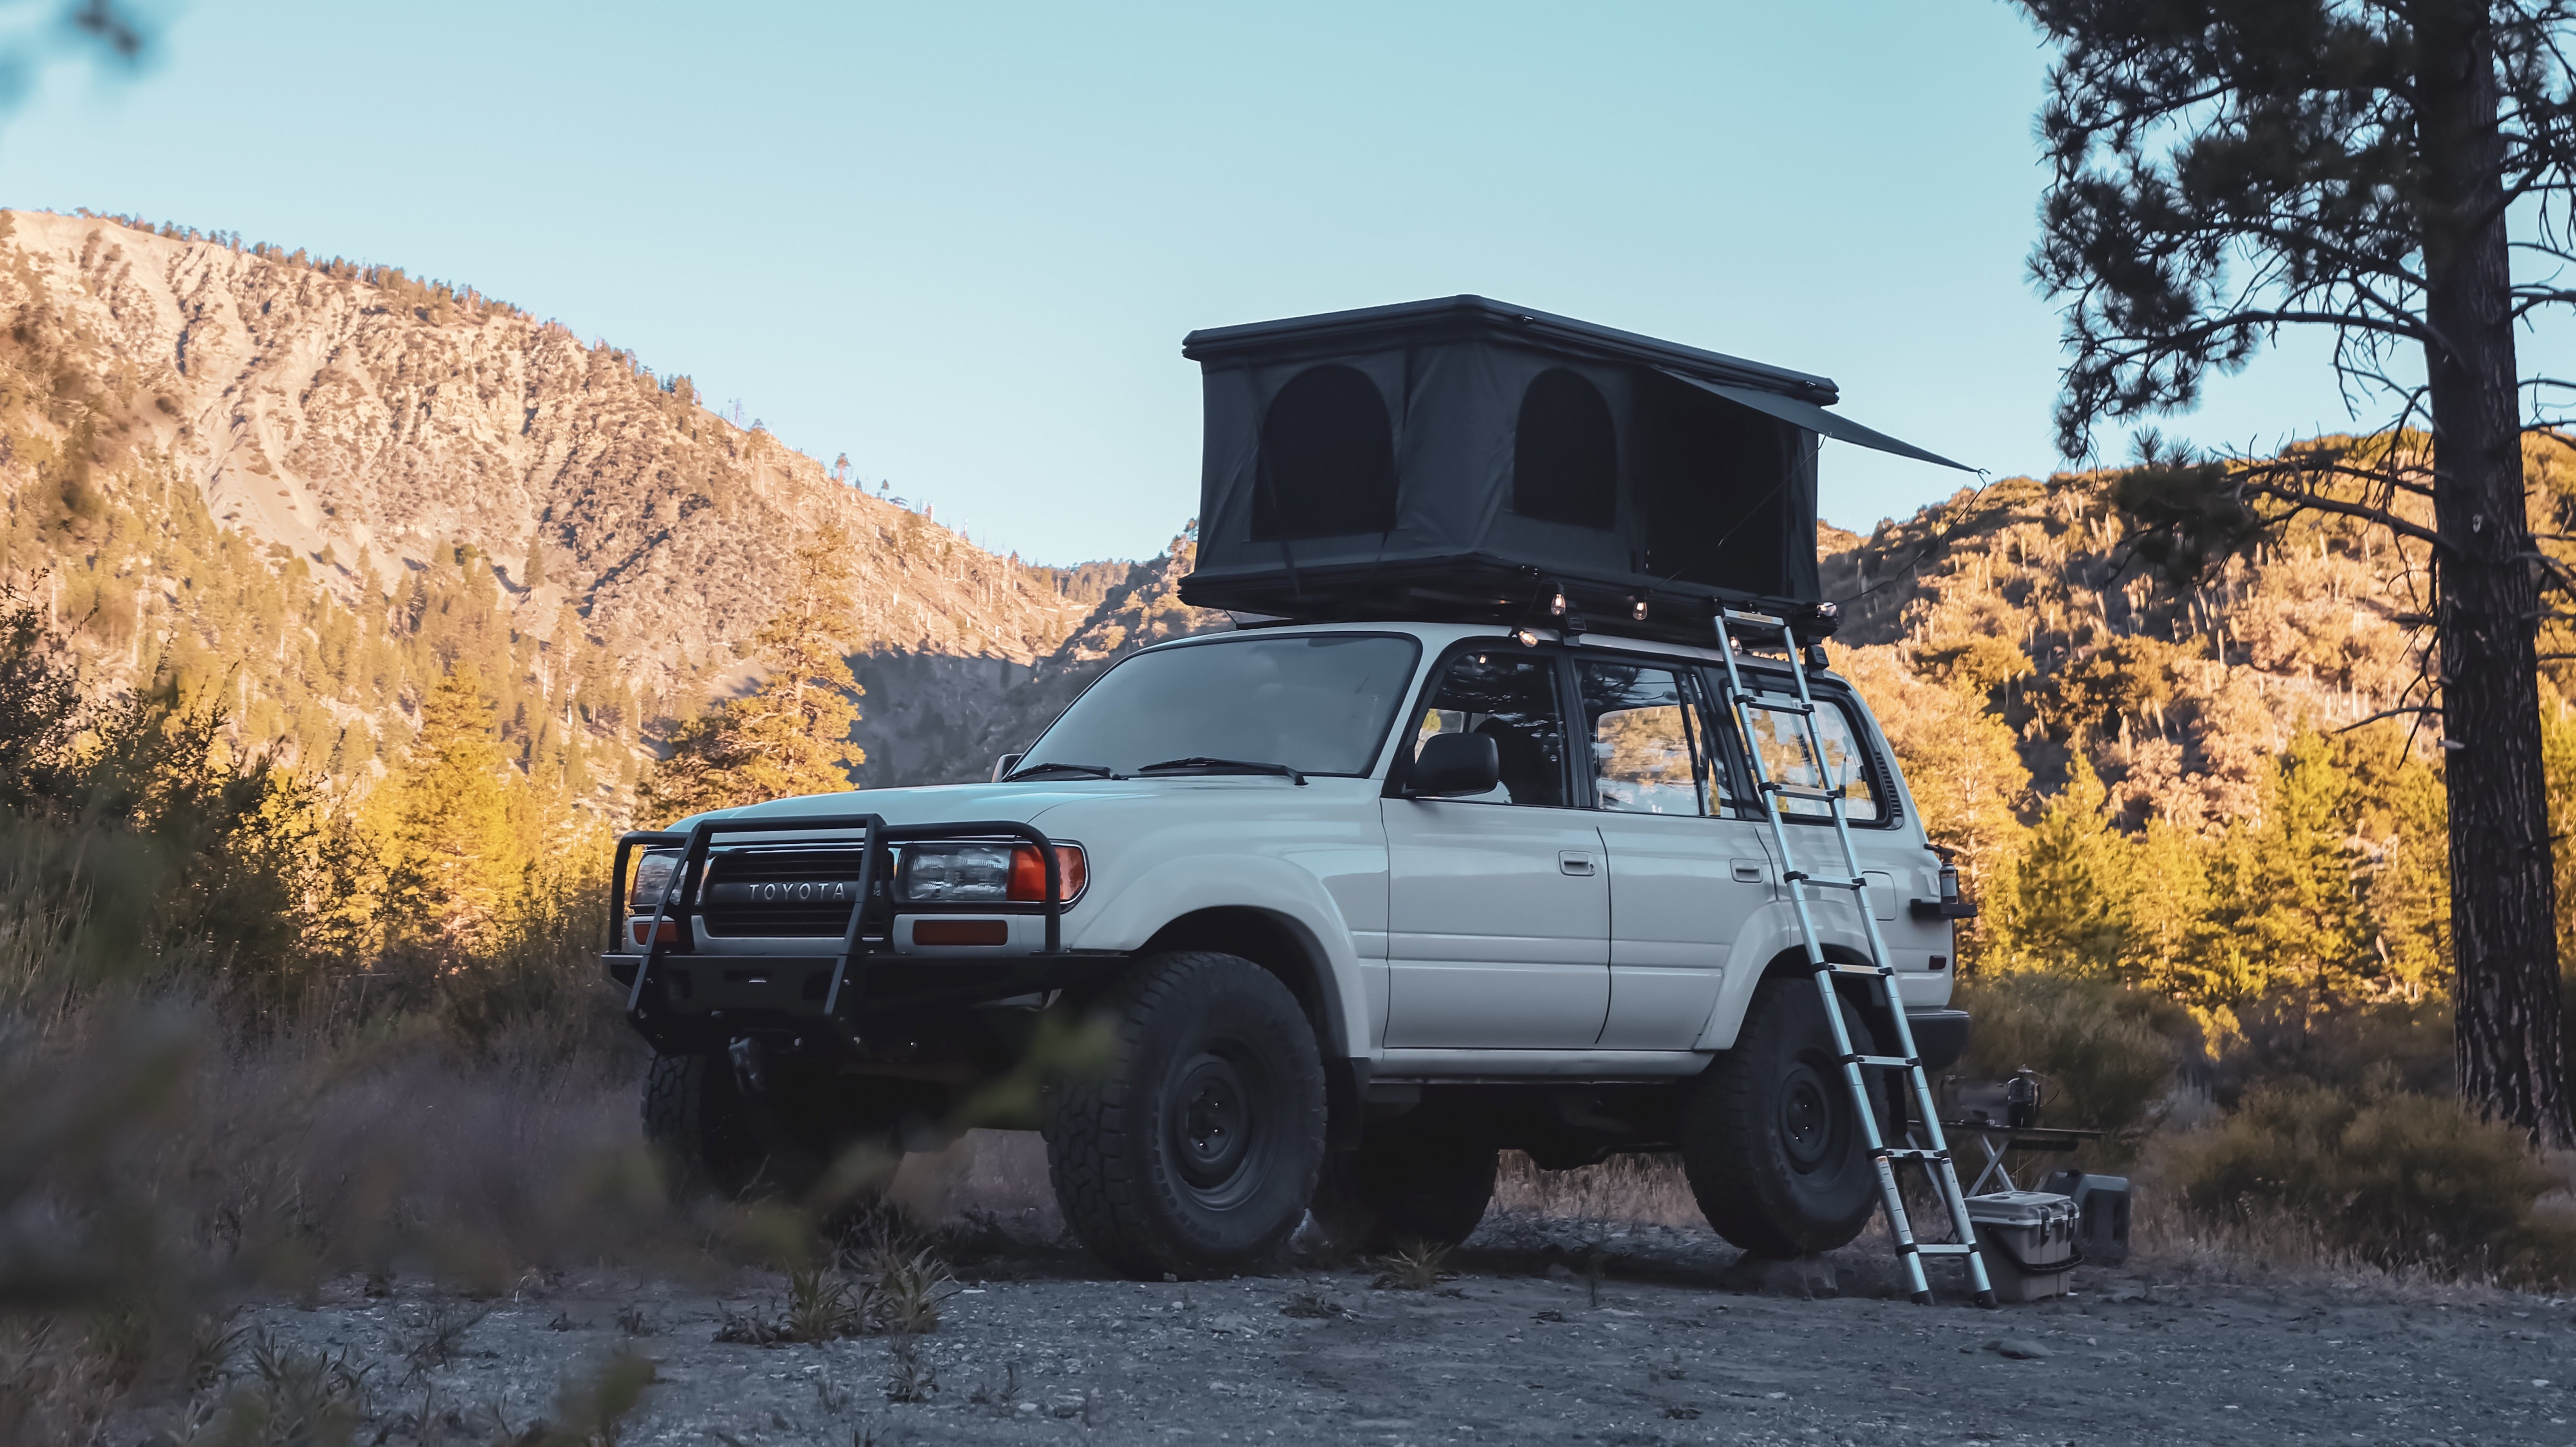 HOW TO STORE A ROOFTOP TENT